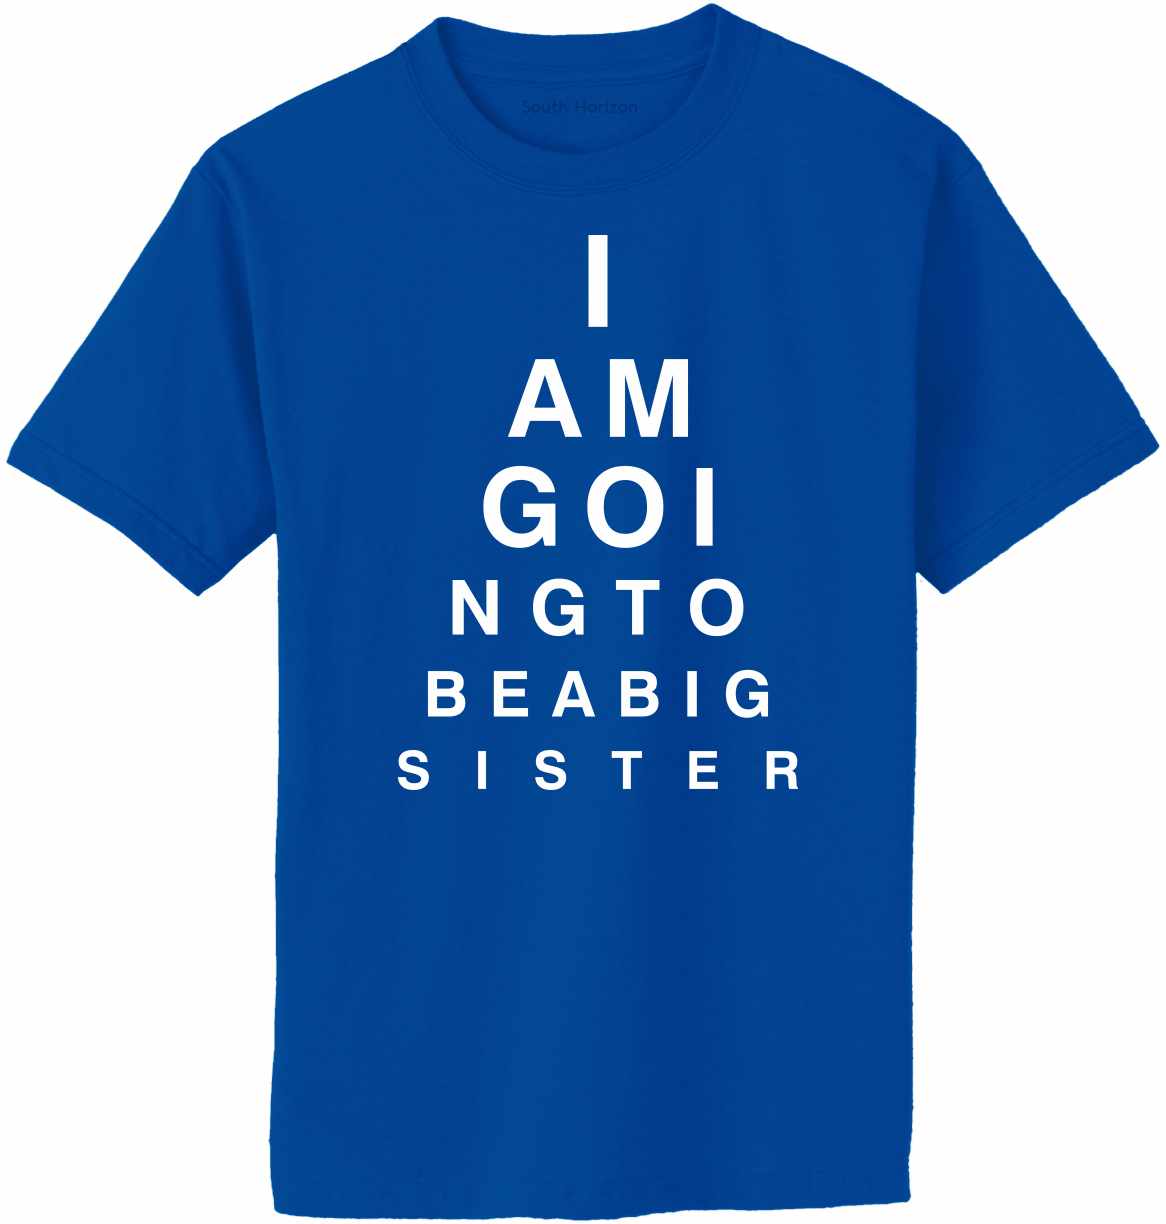 I AM GOING TO BE BIG SISTER EYE CHART Adult T-Shirt